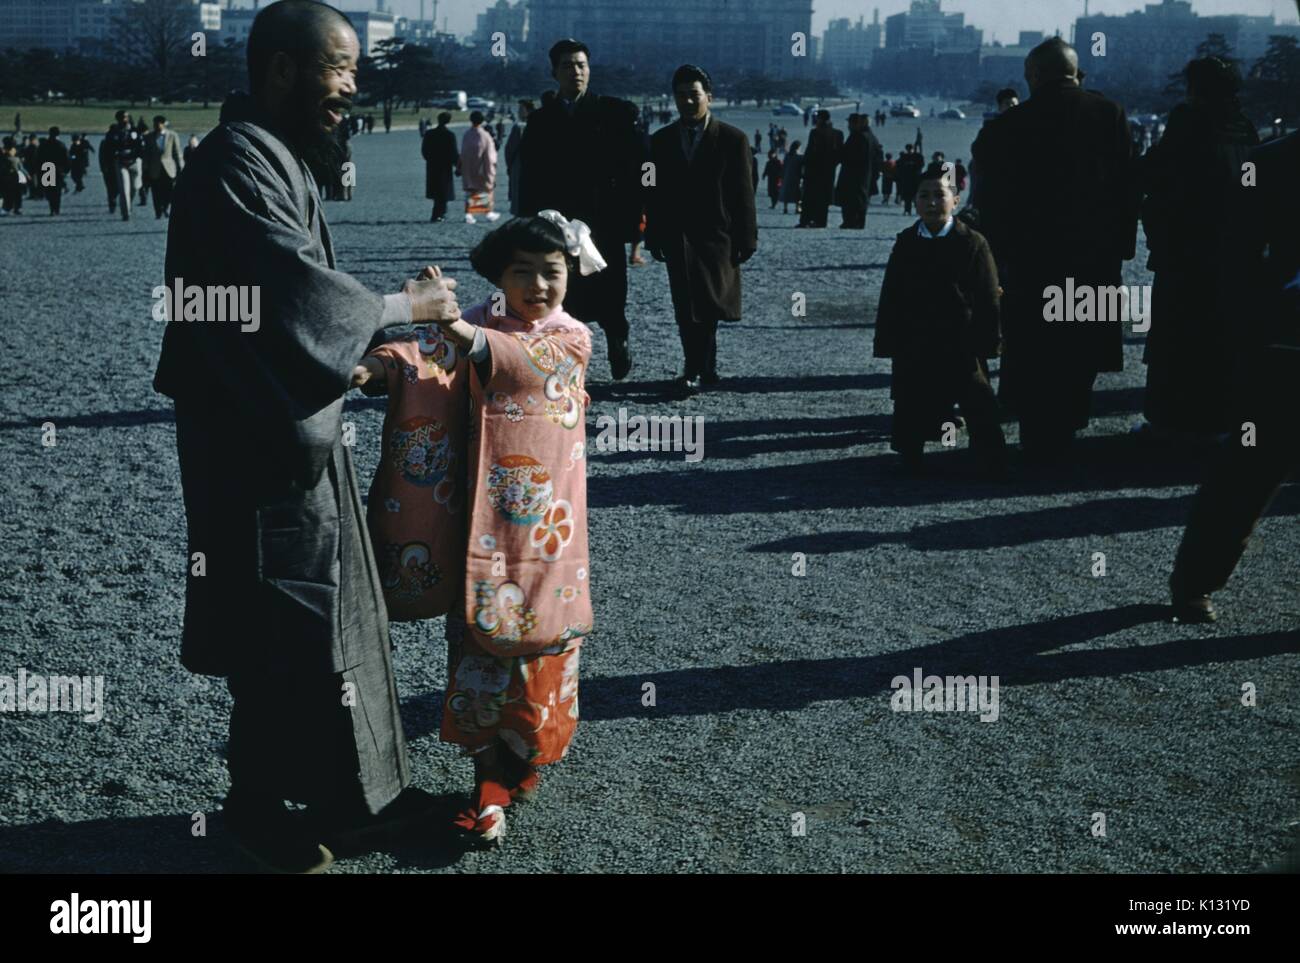 Japanese man with bald head, robe and long beard smiling and holding the hands of his young daughter, who wears a traditional pink Kimono and Geta sandals, in a public square, with a large number of people walking past in groups of two to three, 1952. Stock Photo